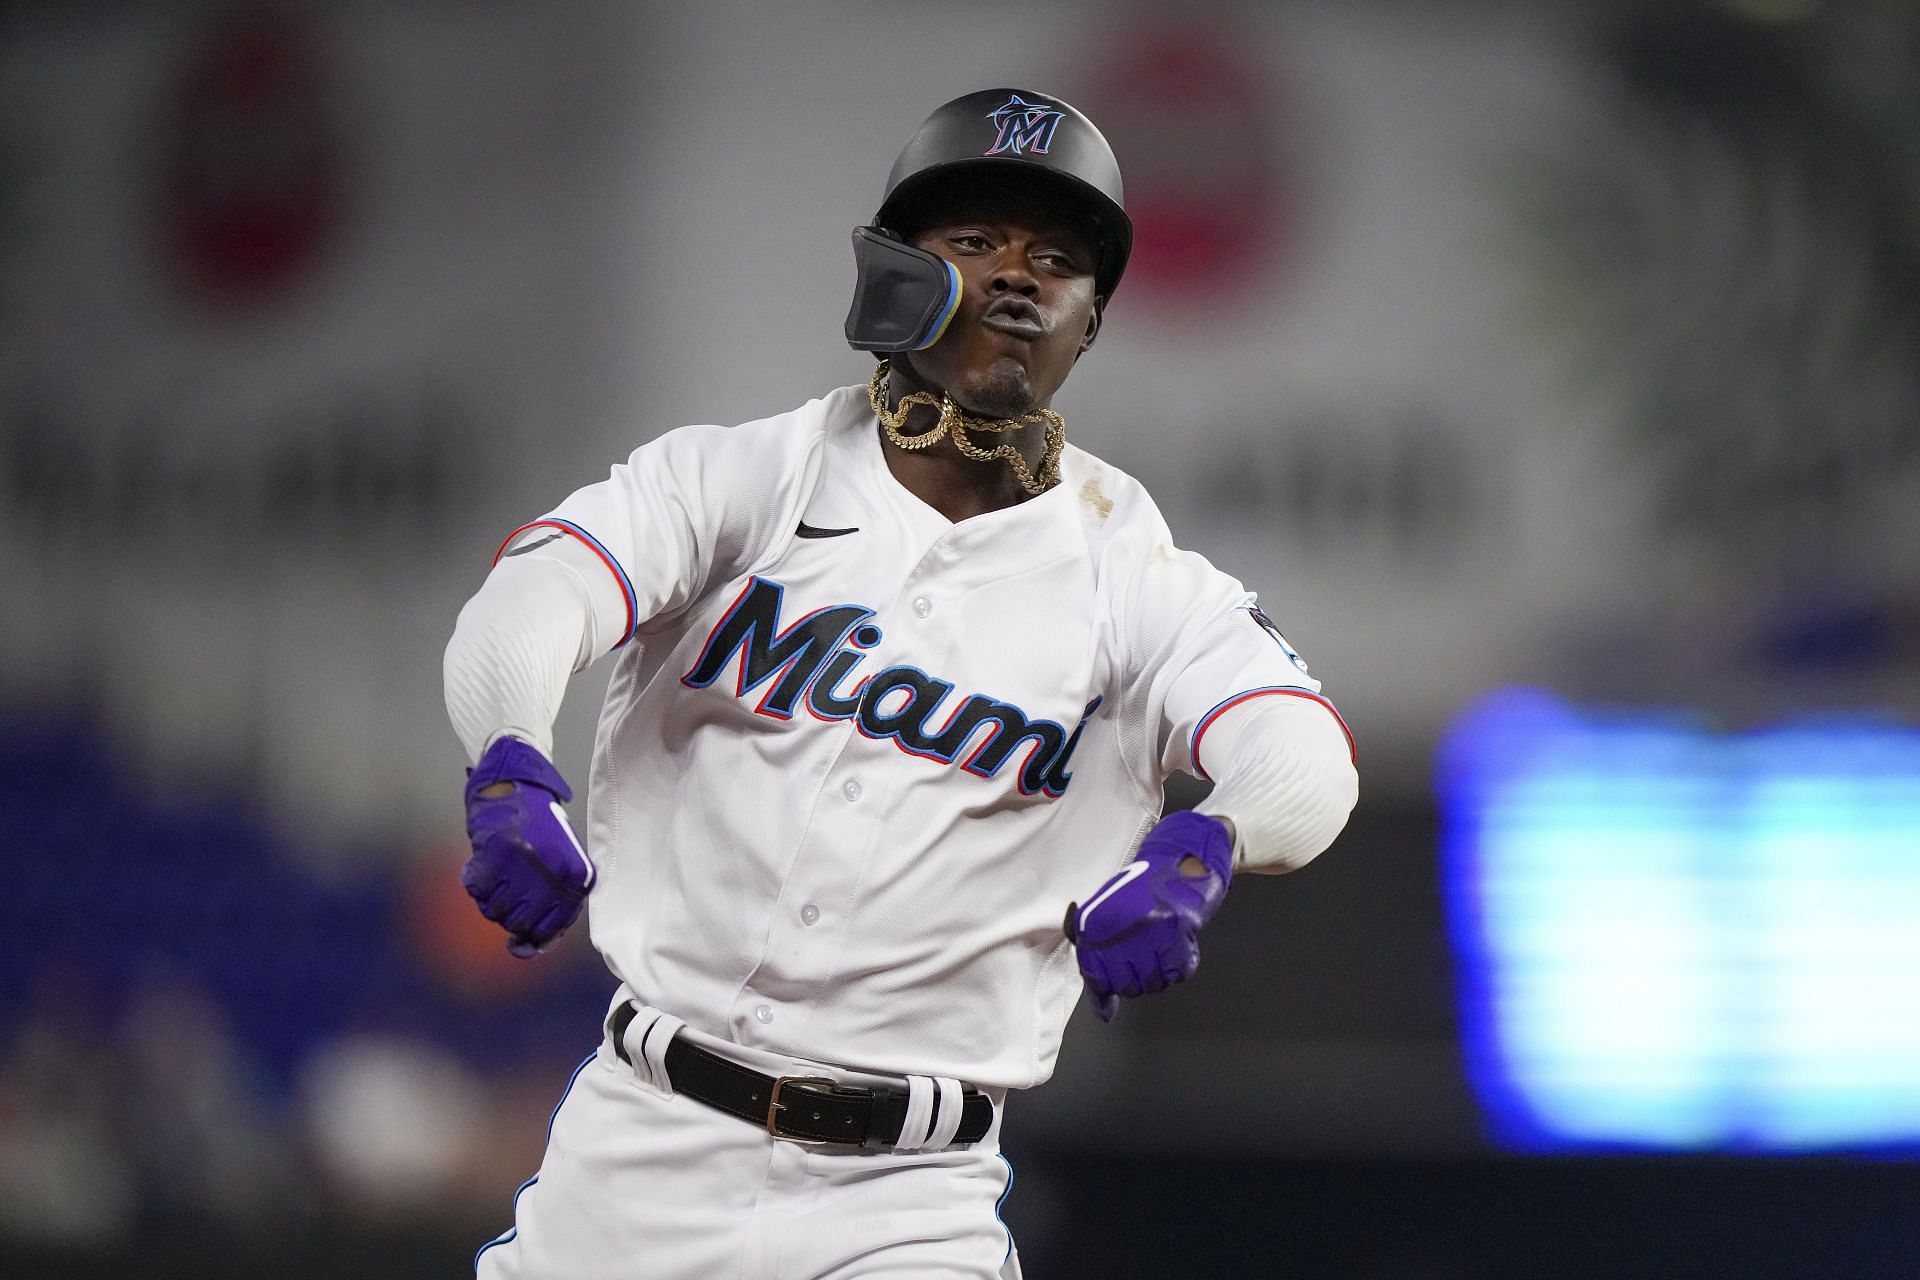 Marlins trying to hide roster flaws with Jazz Chisholm-in-center